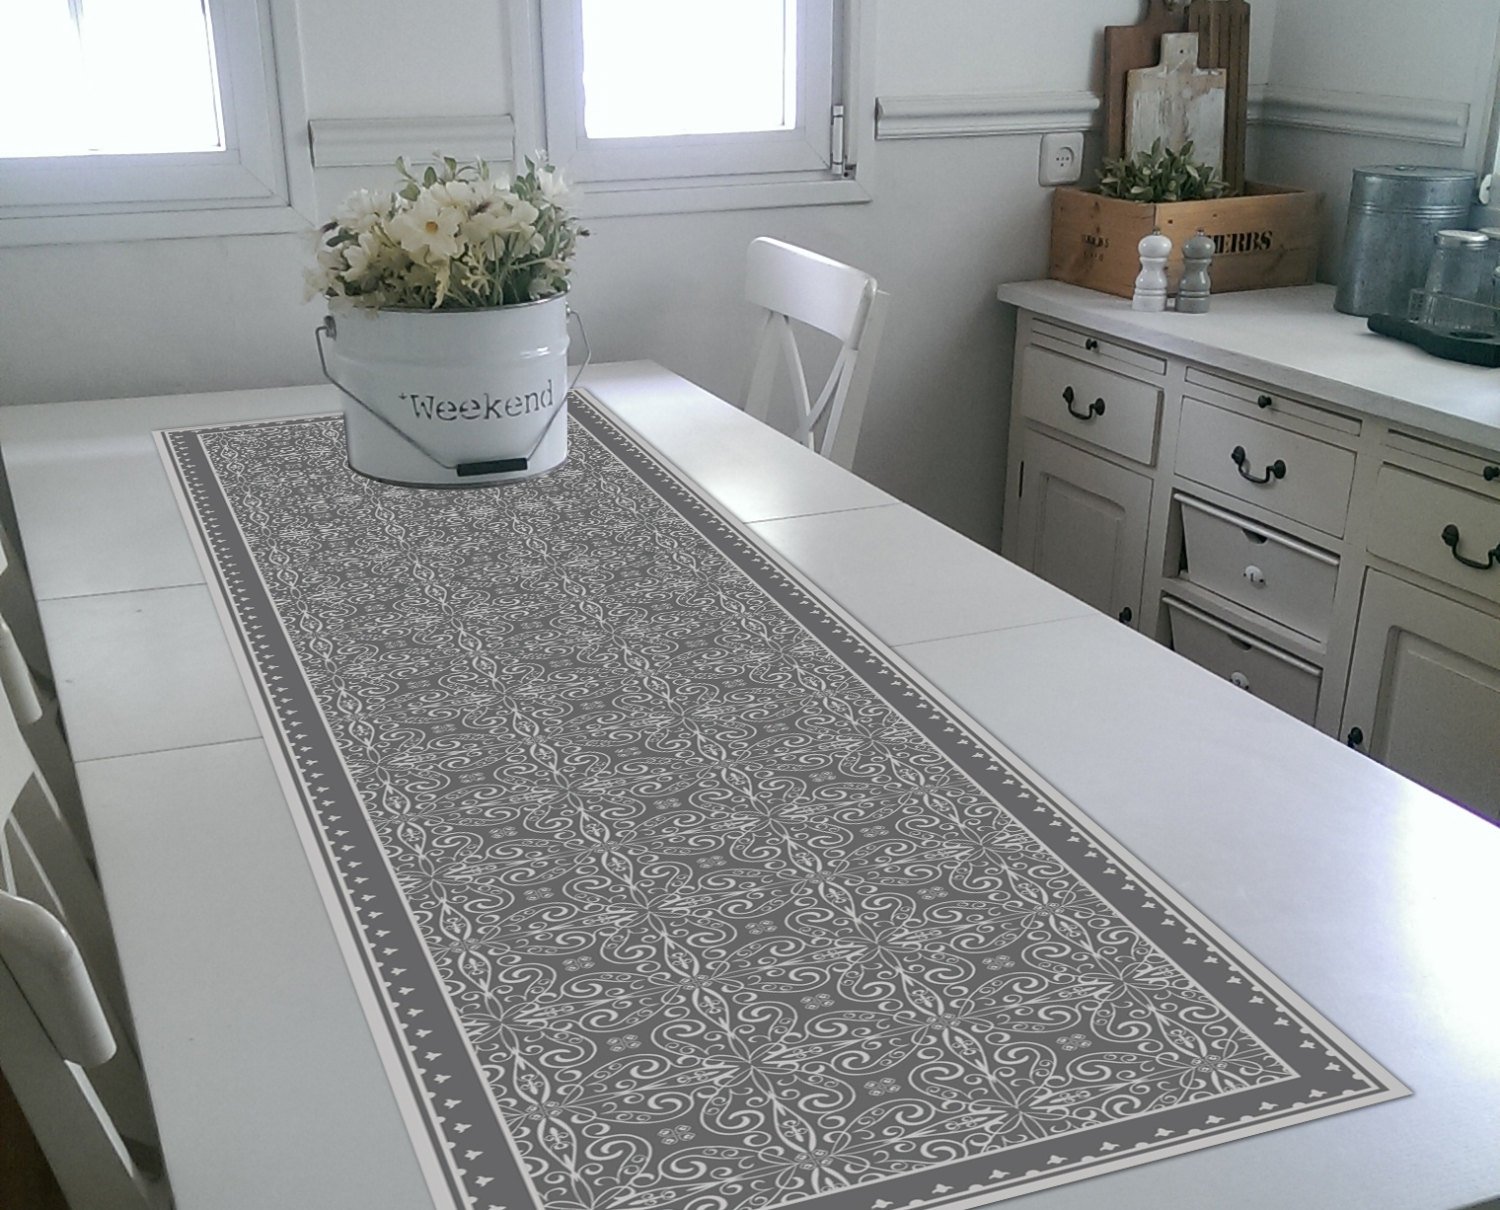 kitchen table runner with placemats